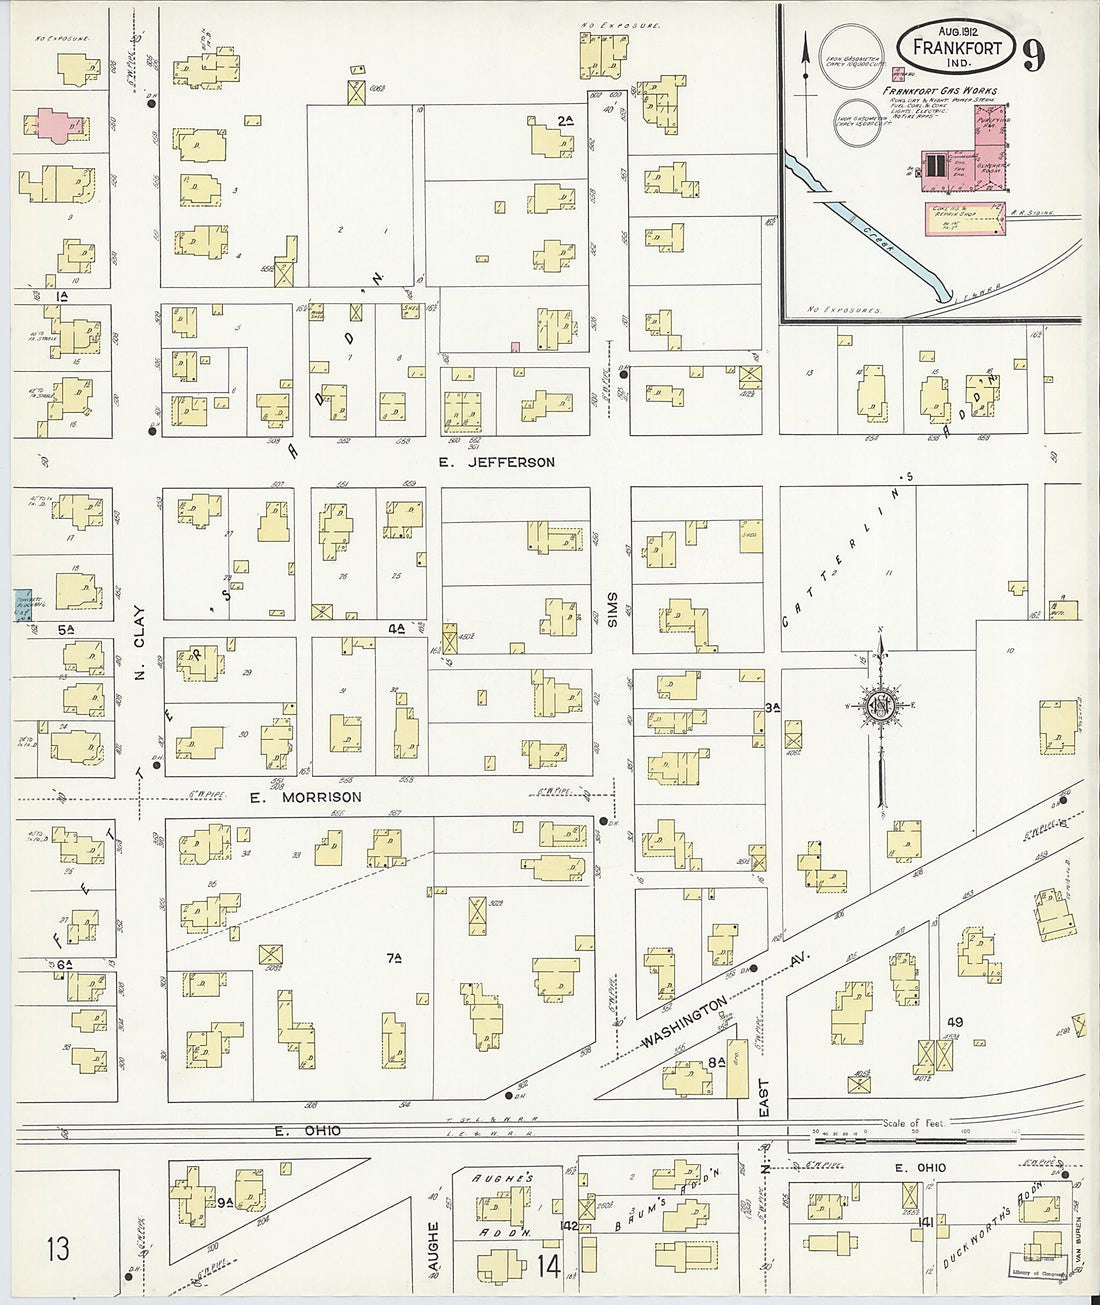 This old map of Frankfort, Clinton County, Indiana was created by Sanborn Map Company in 1912